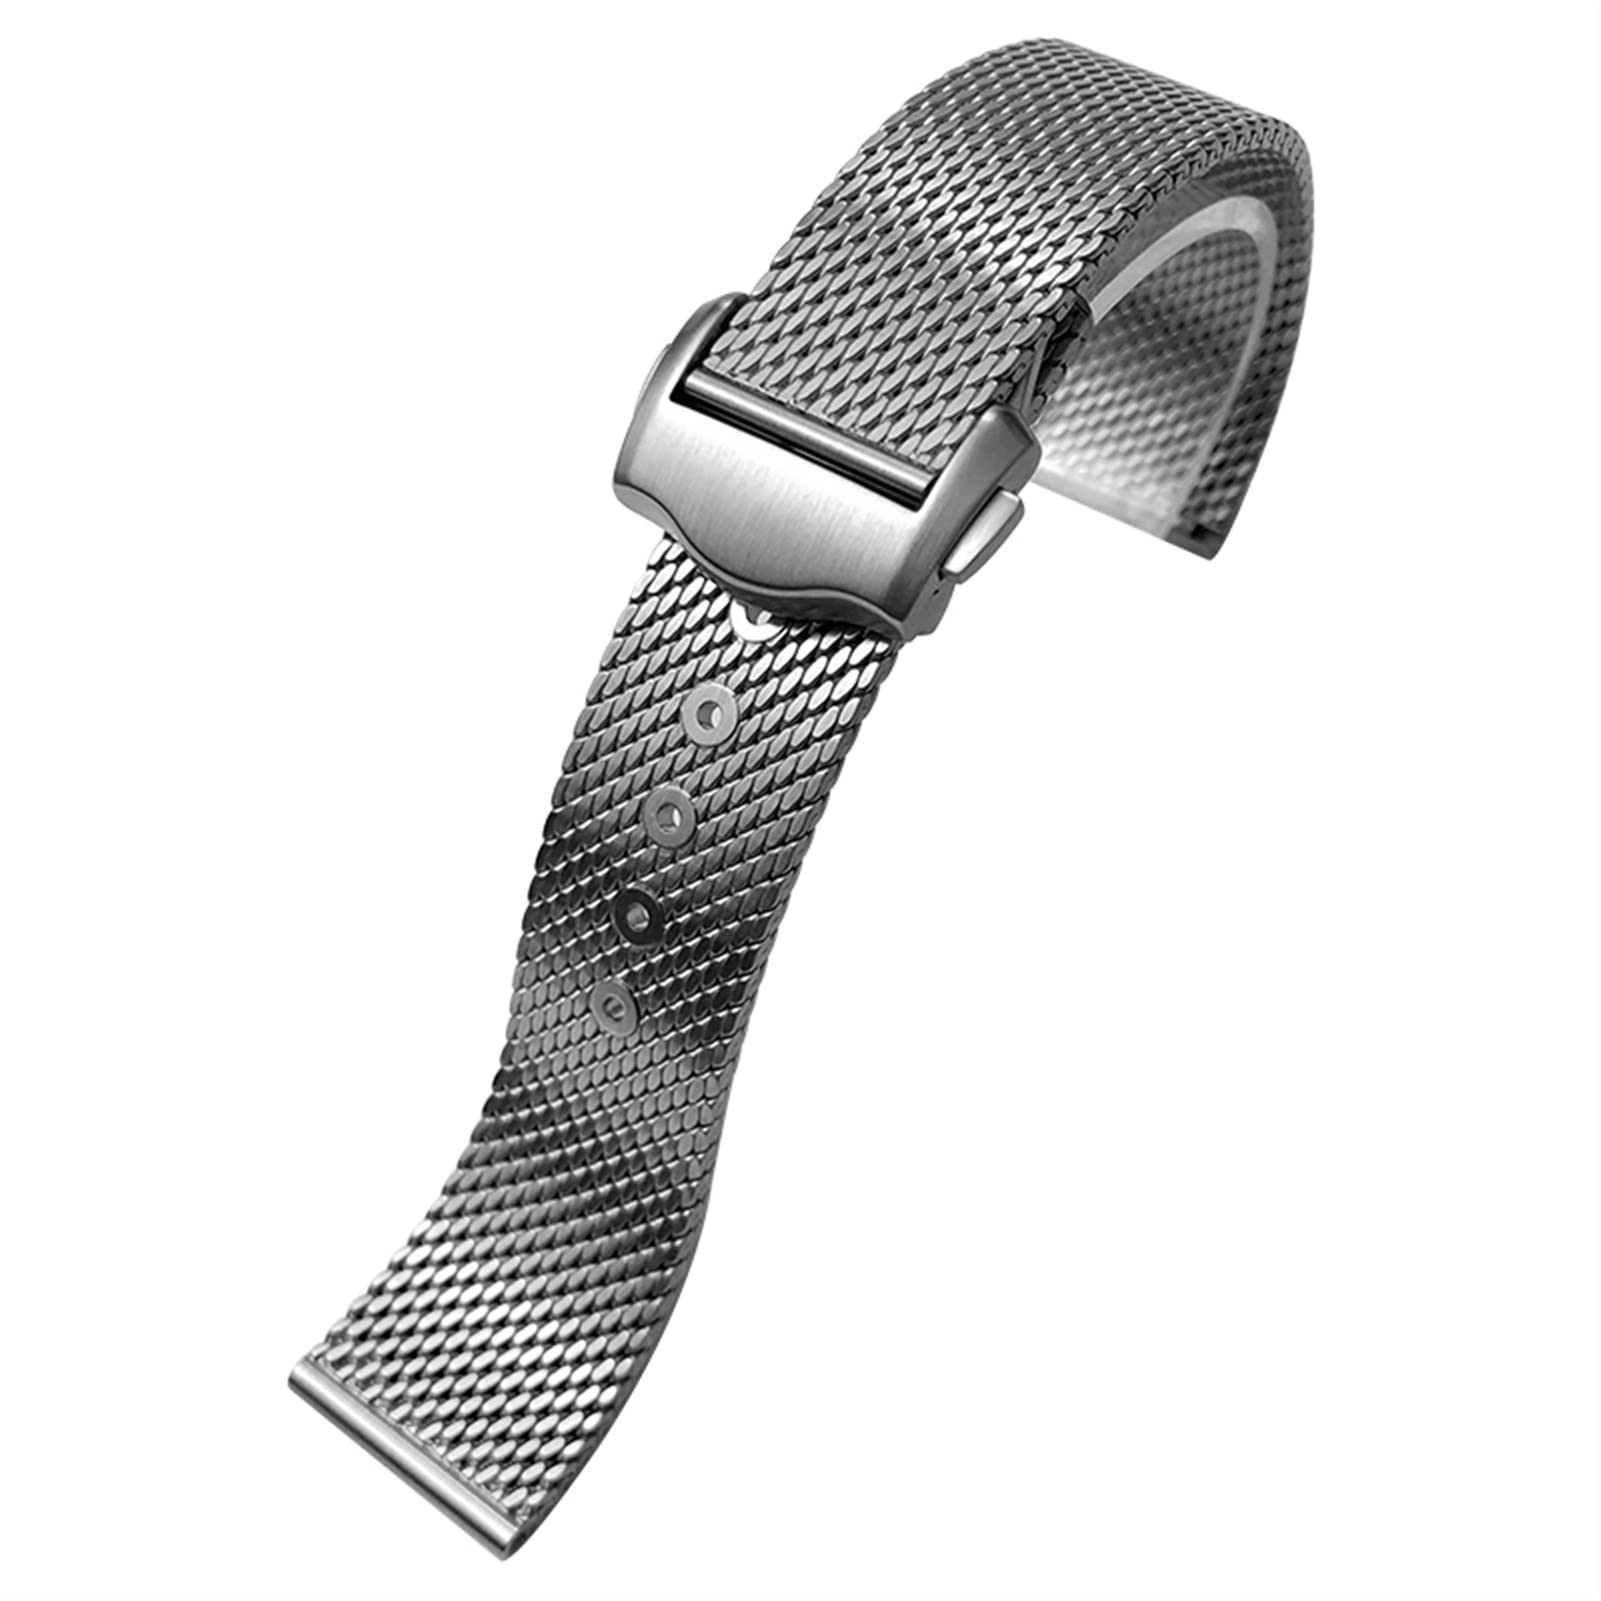 AEMALL 20mm Titanium Steel Braided Watchband Fit for Omega 007 Seamaster James Bond Watch Band Strap Deployment Buckle